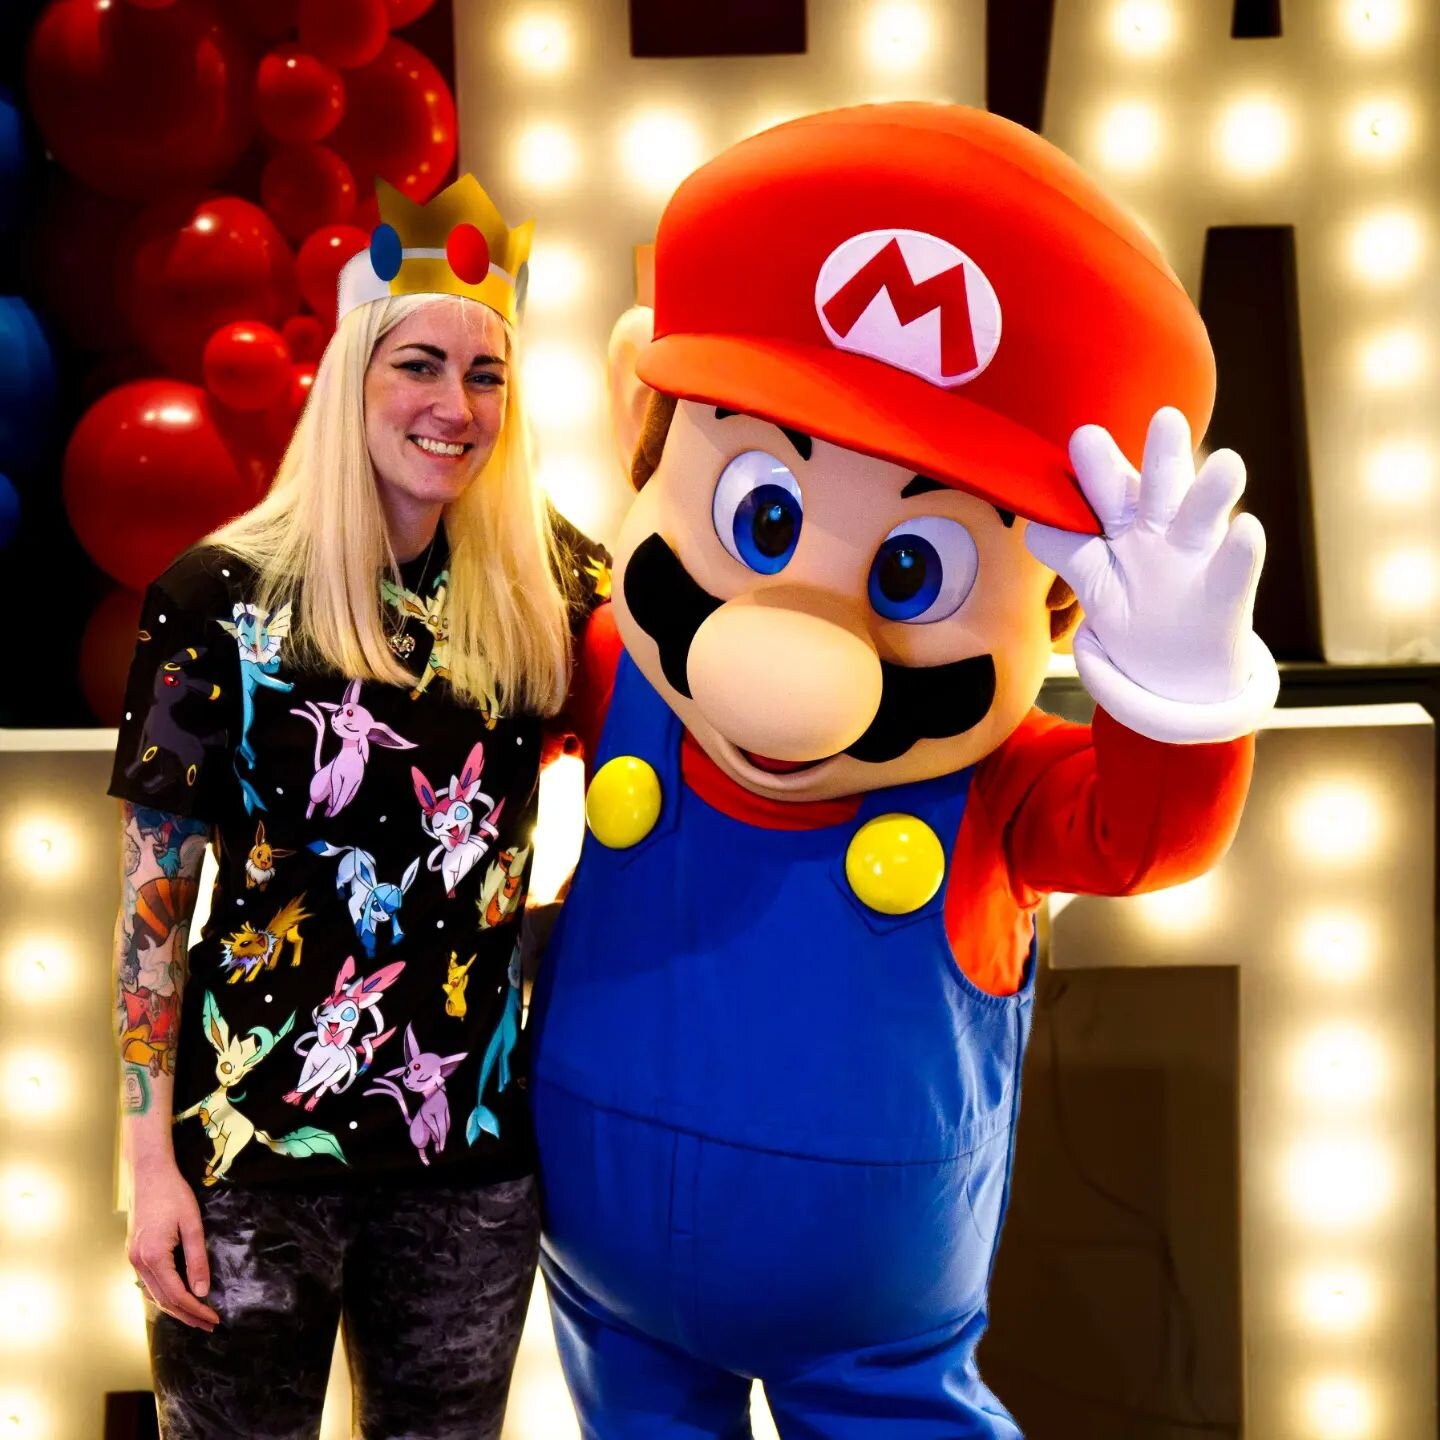 Here are a few more from Friday's #Mar10Day festivities! I had a blast playing all of the games featuring our favourite plumber, and I won a Mario Kart challenge 🎉🥳

📸 by @byteordermarc